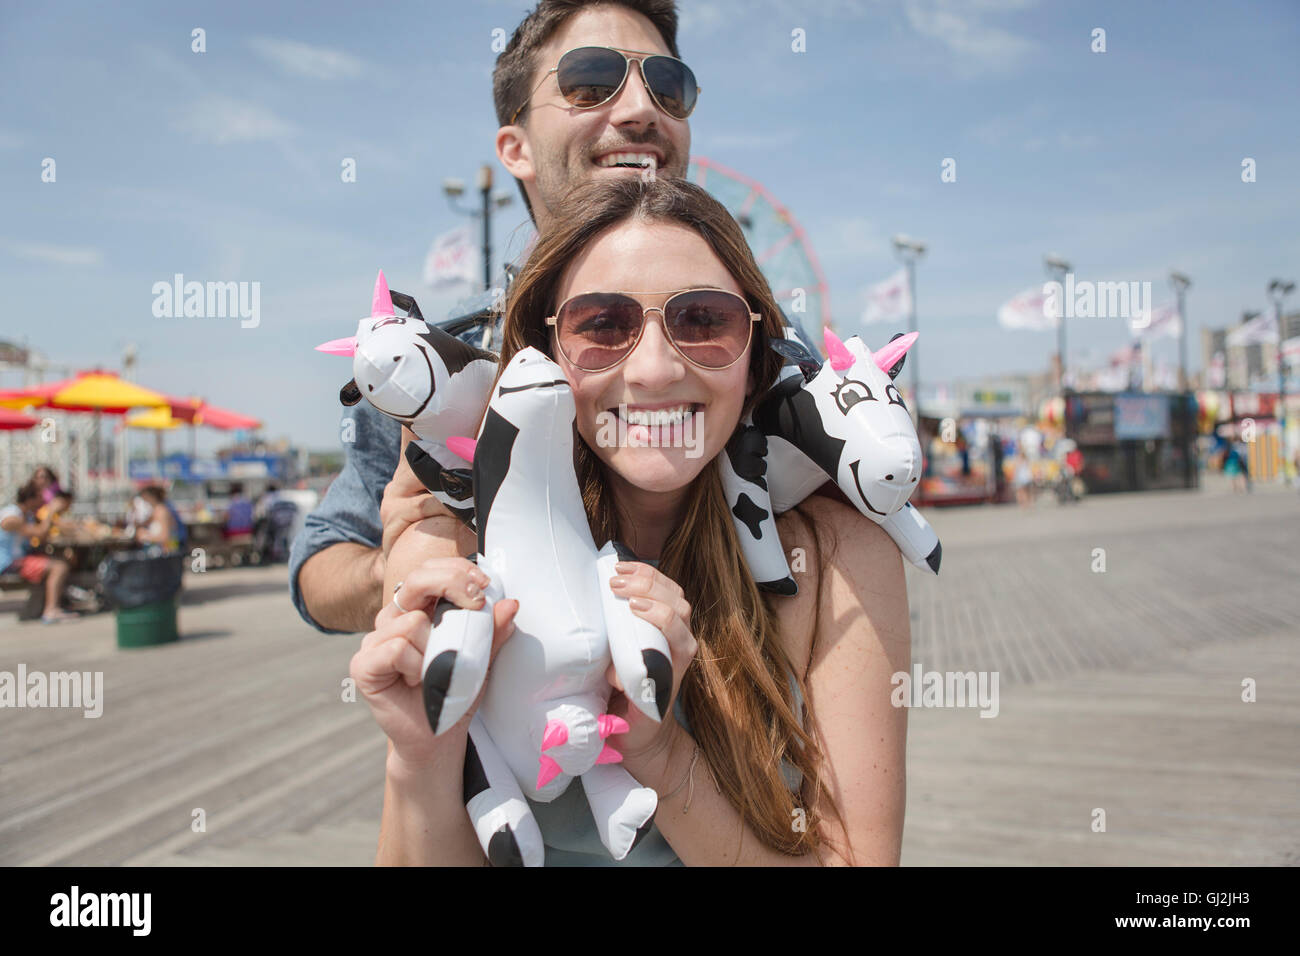 Les vaches en peluche couple smiling, Coney Island, Brooklyn, New York, USA Banque D'Images